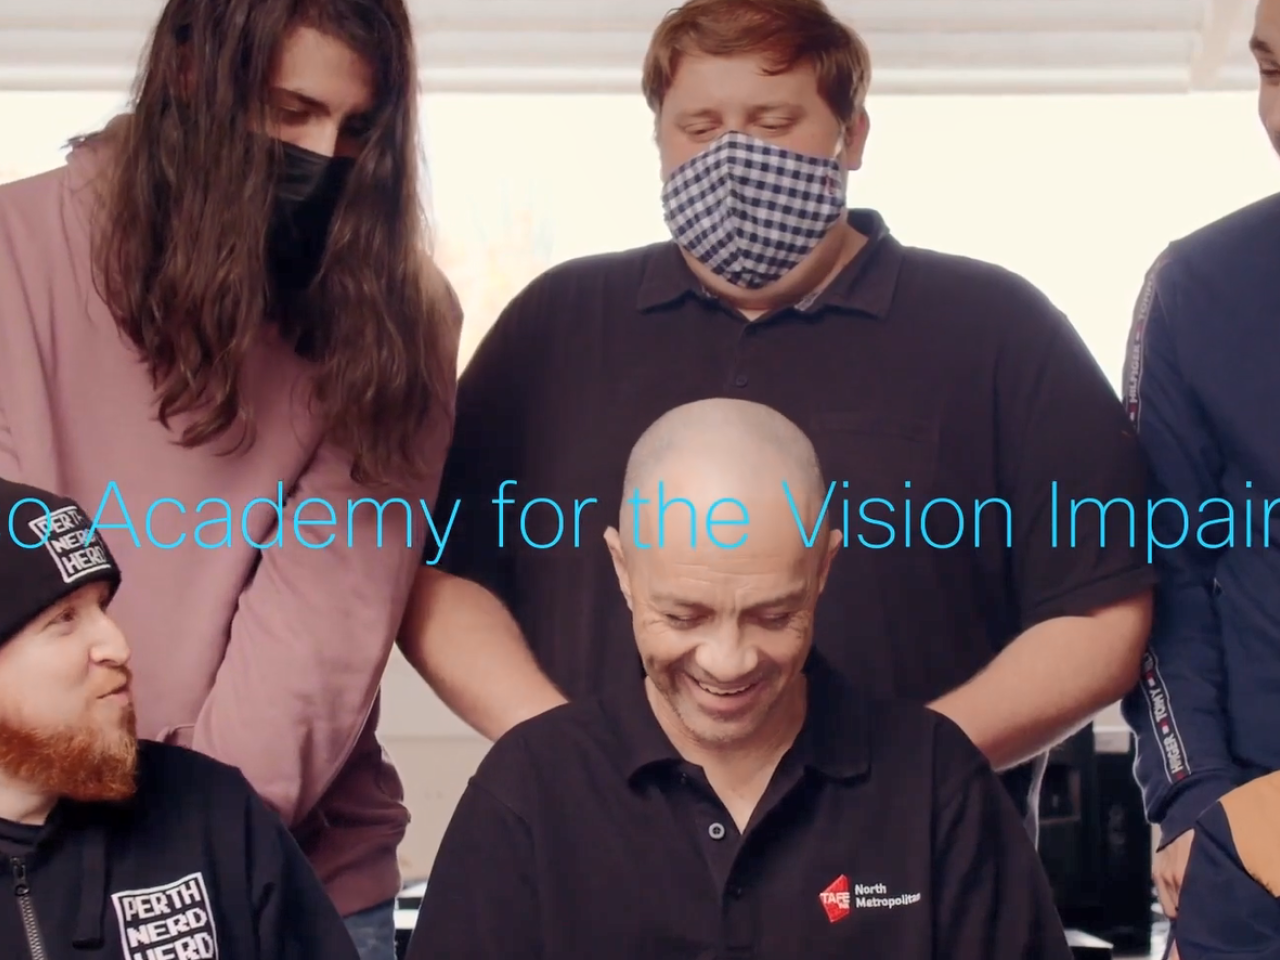 Neil and students seated around him. "Cisco Academy for the Vision Impaired".